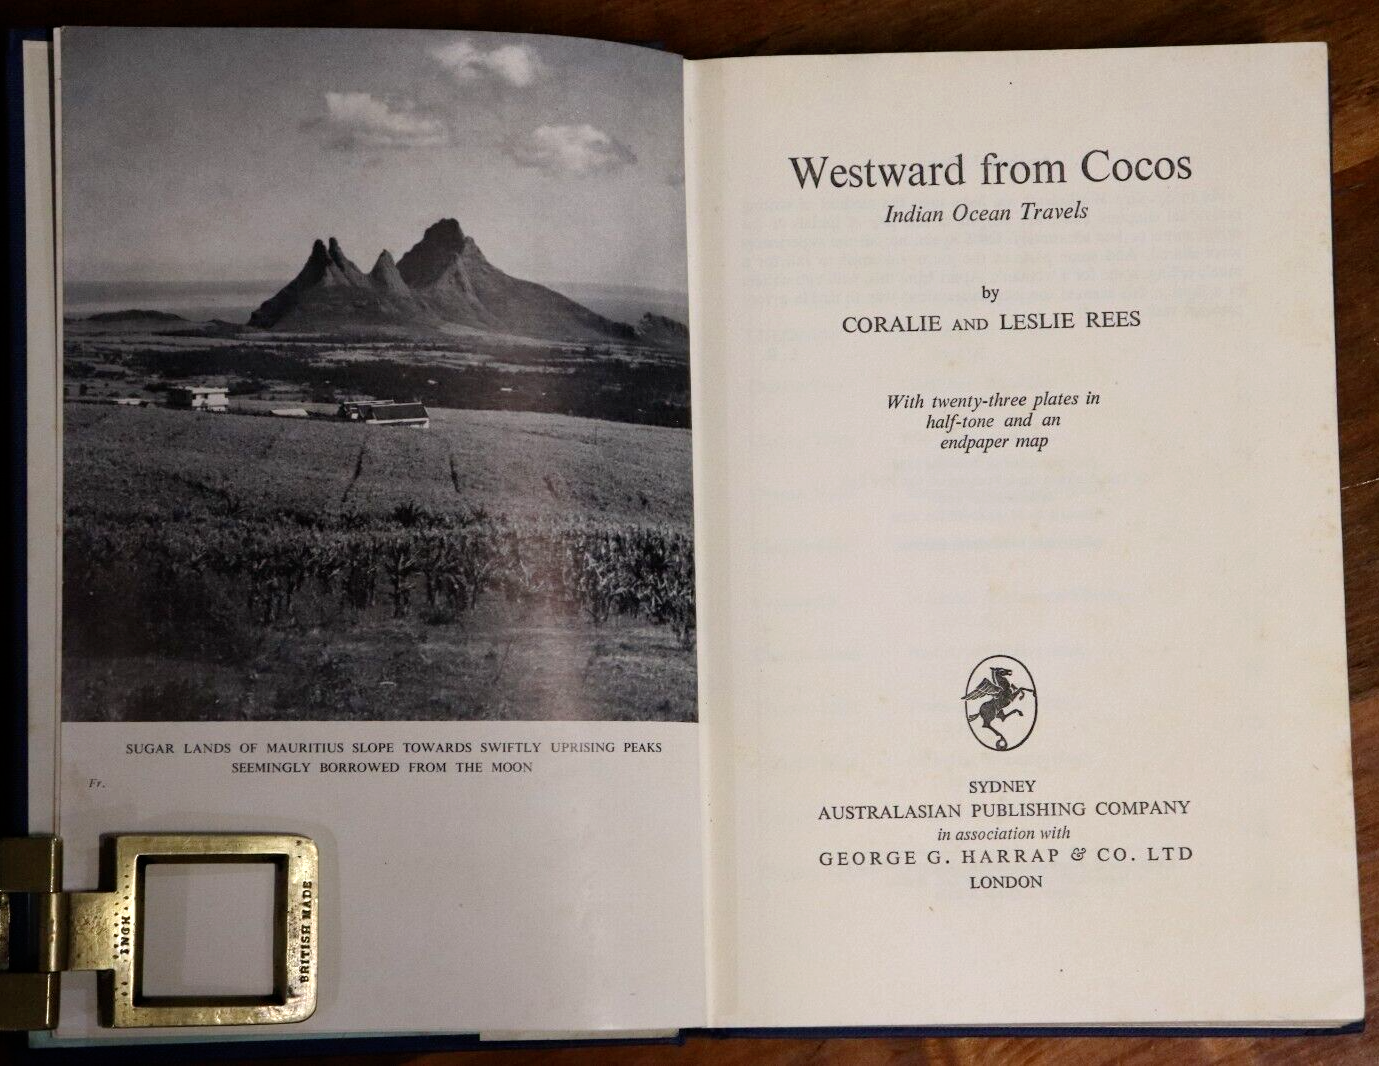 1956 Westward From Cocos by C&L Rees 1st Edition Travel Book Indian Ocean - 0